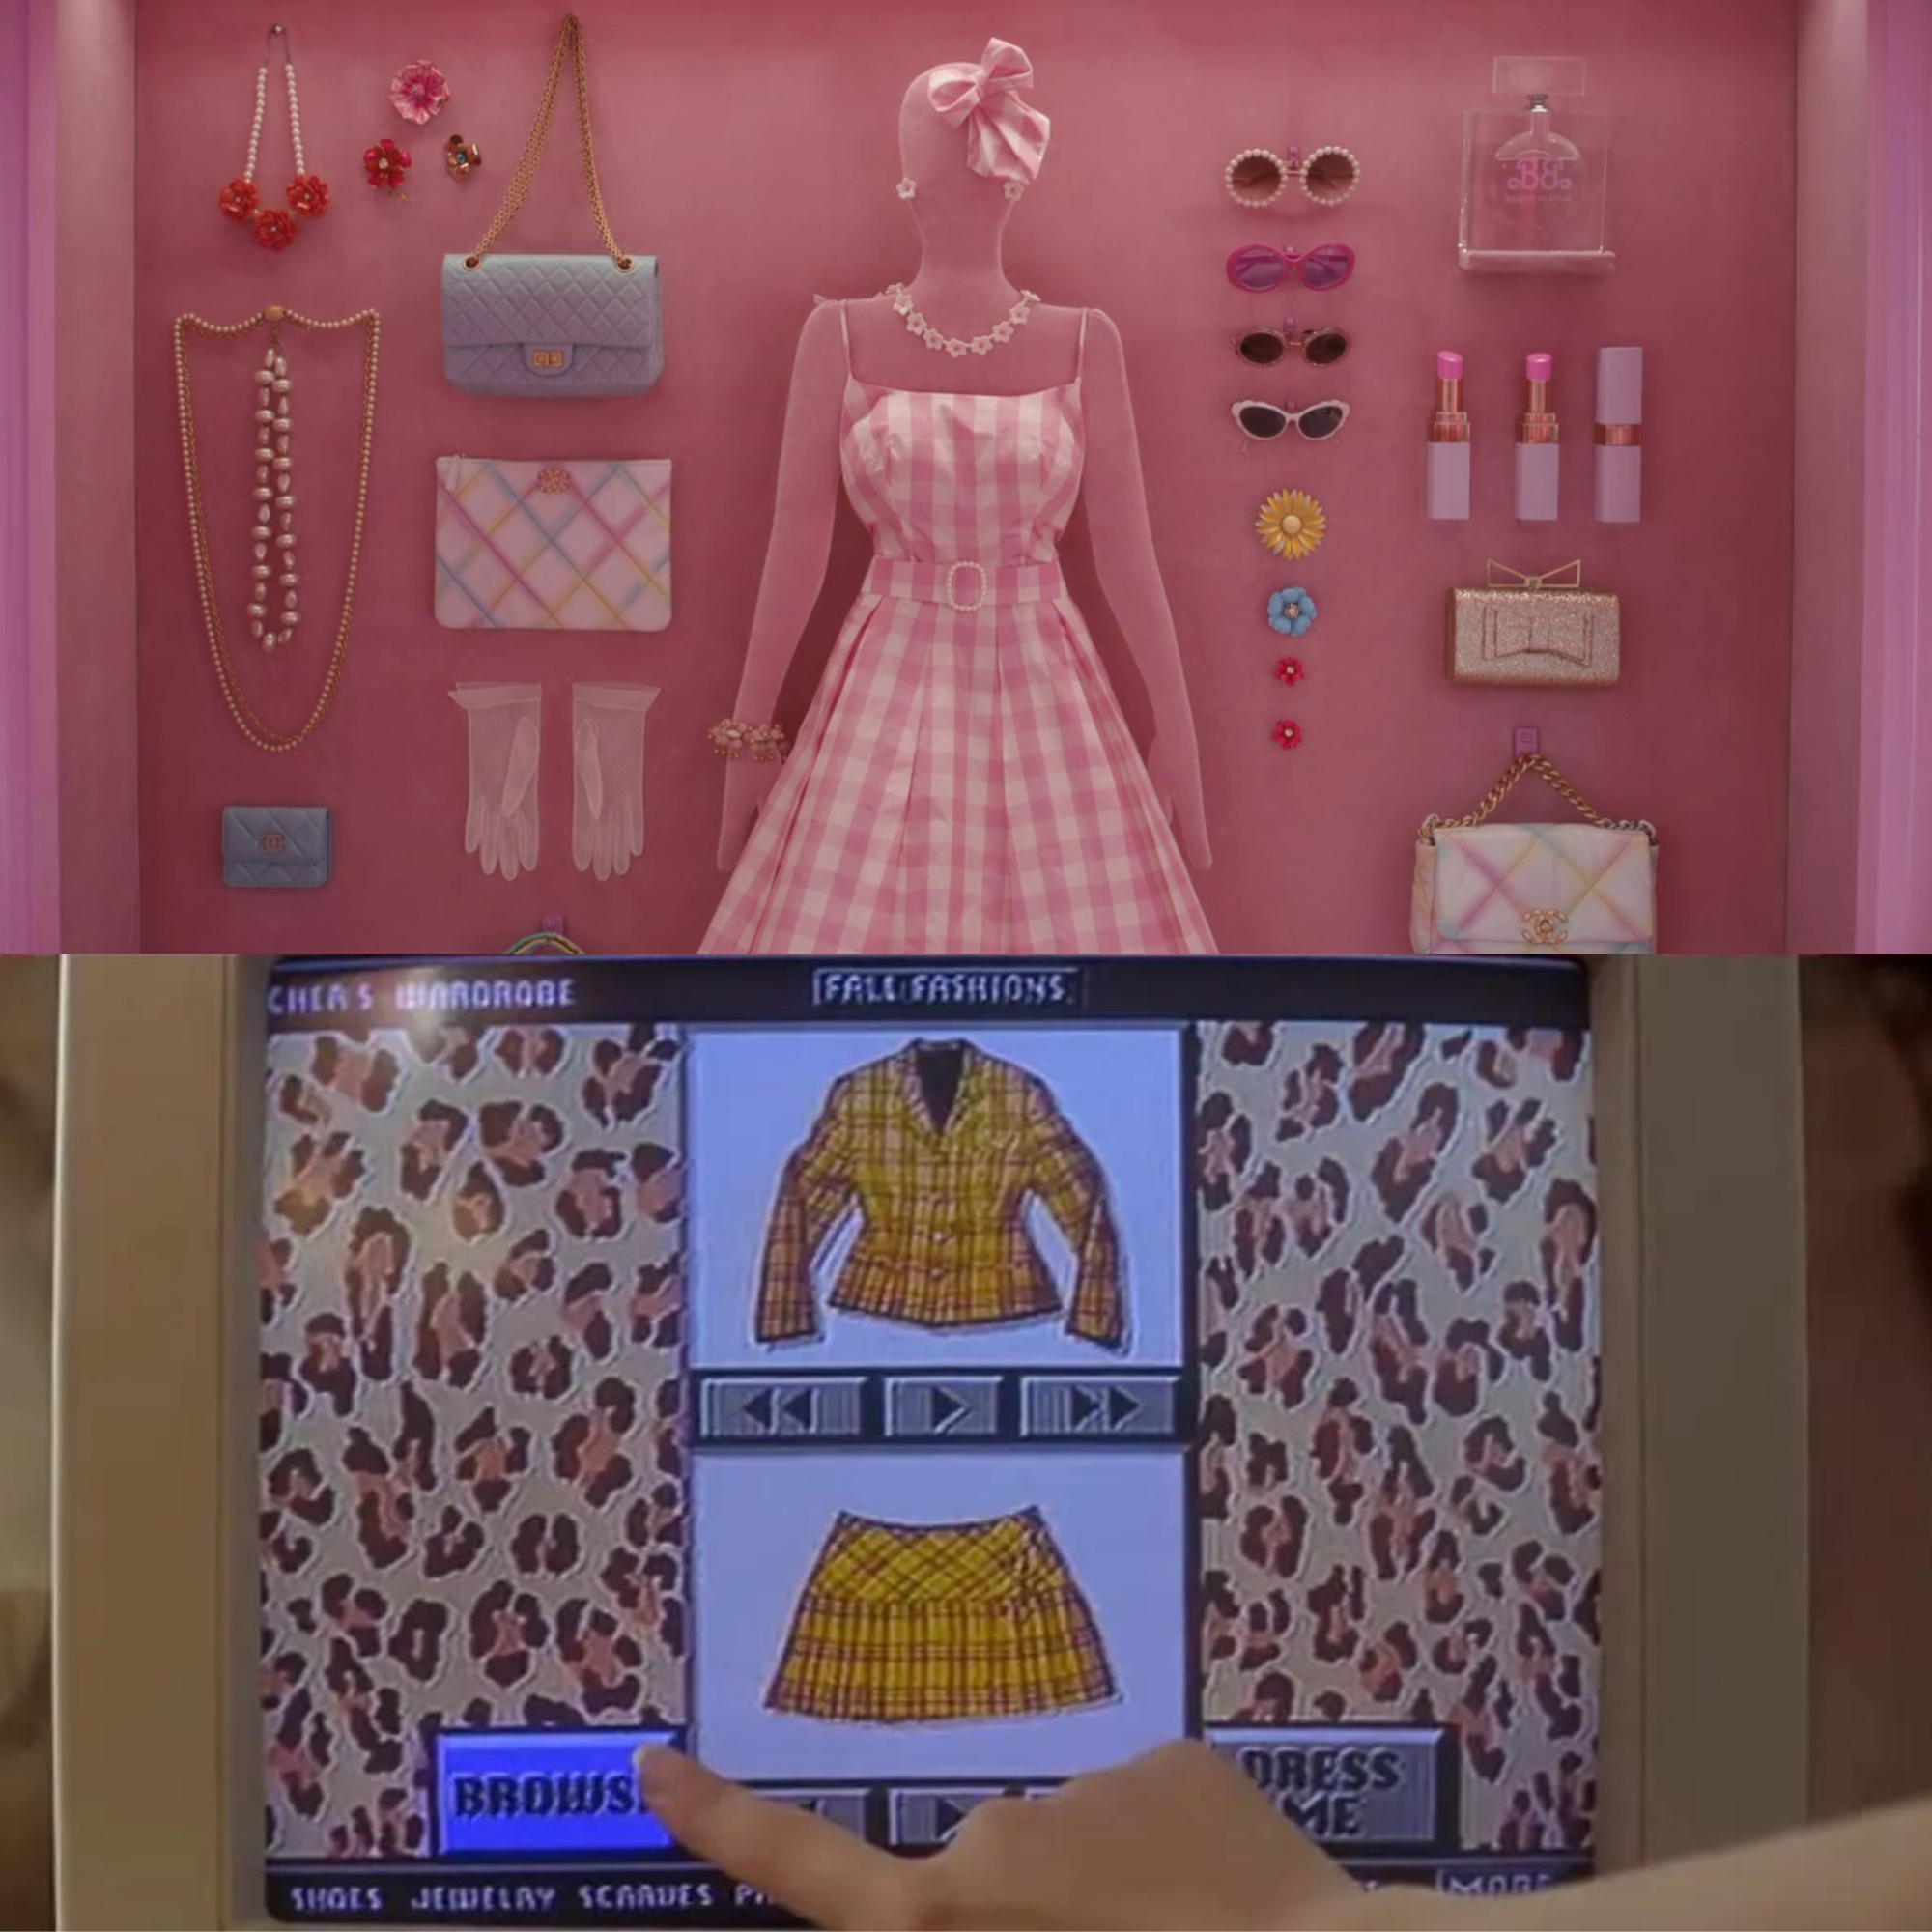 top: barbie&#39;s closet in barbie, featuring a pink dress and laid out accessories; bottom: the virtual closet in clueless, showing a selection option for a skirt and jacket on a computer screen